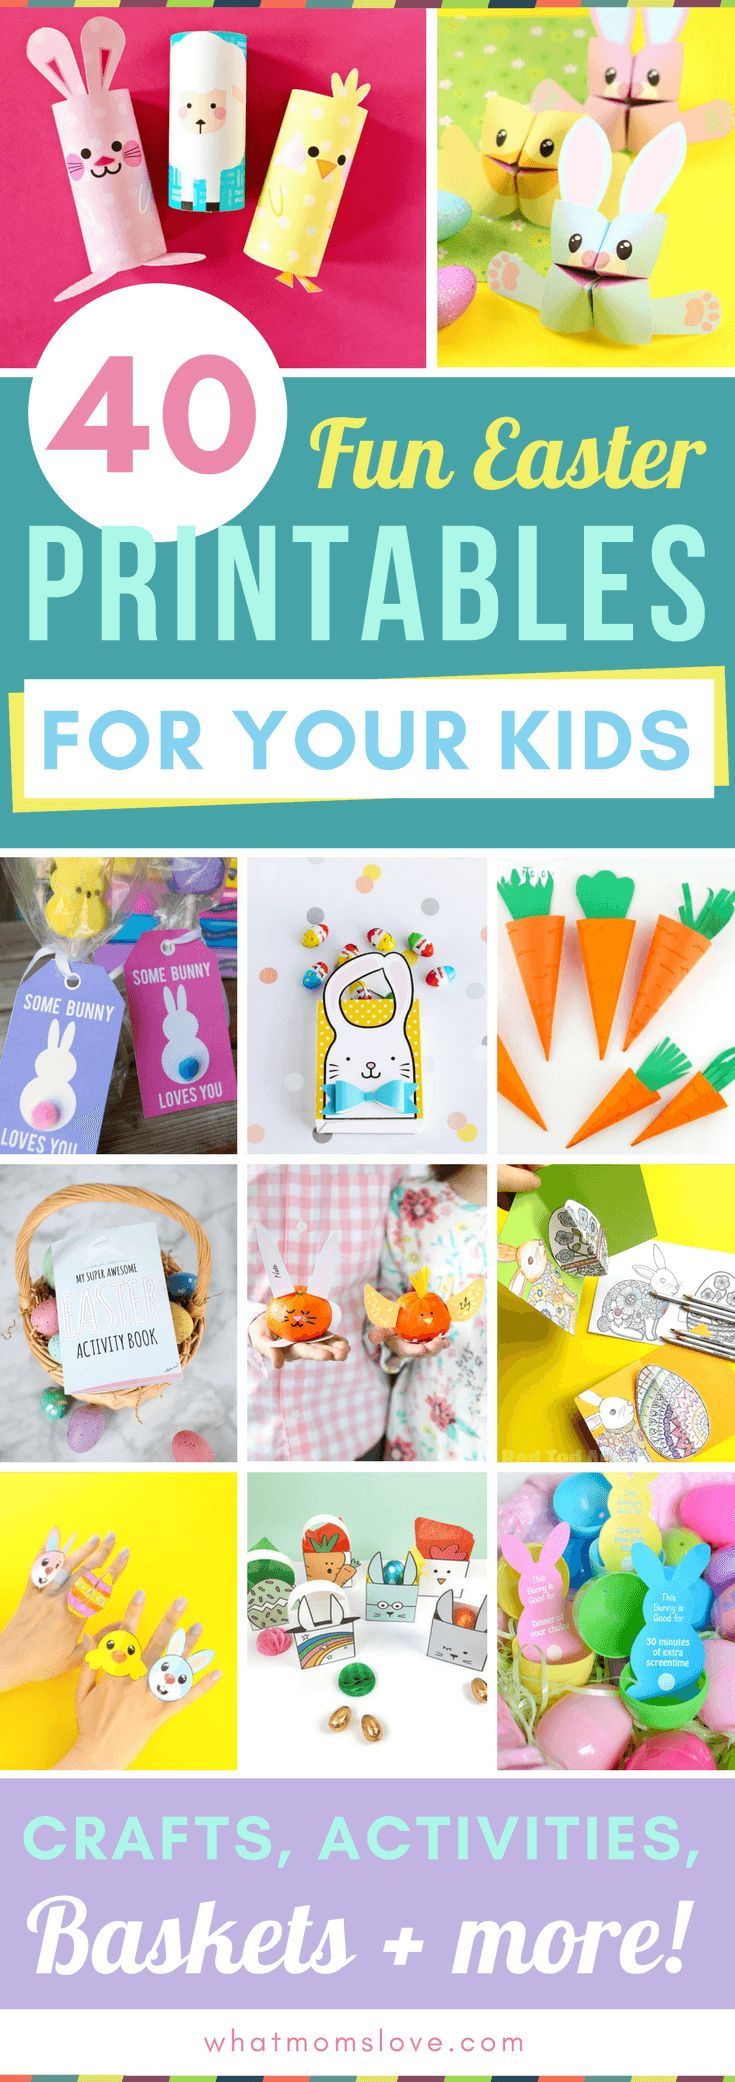 Printable Easter Activities for Kids including fun crafts, scavenger hunts, colo...